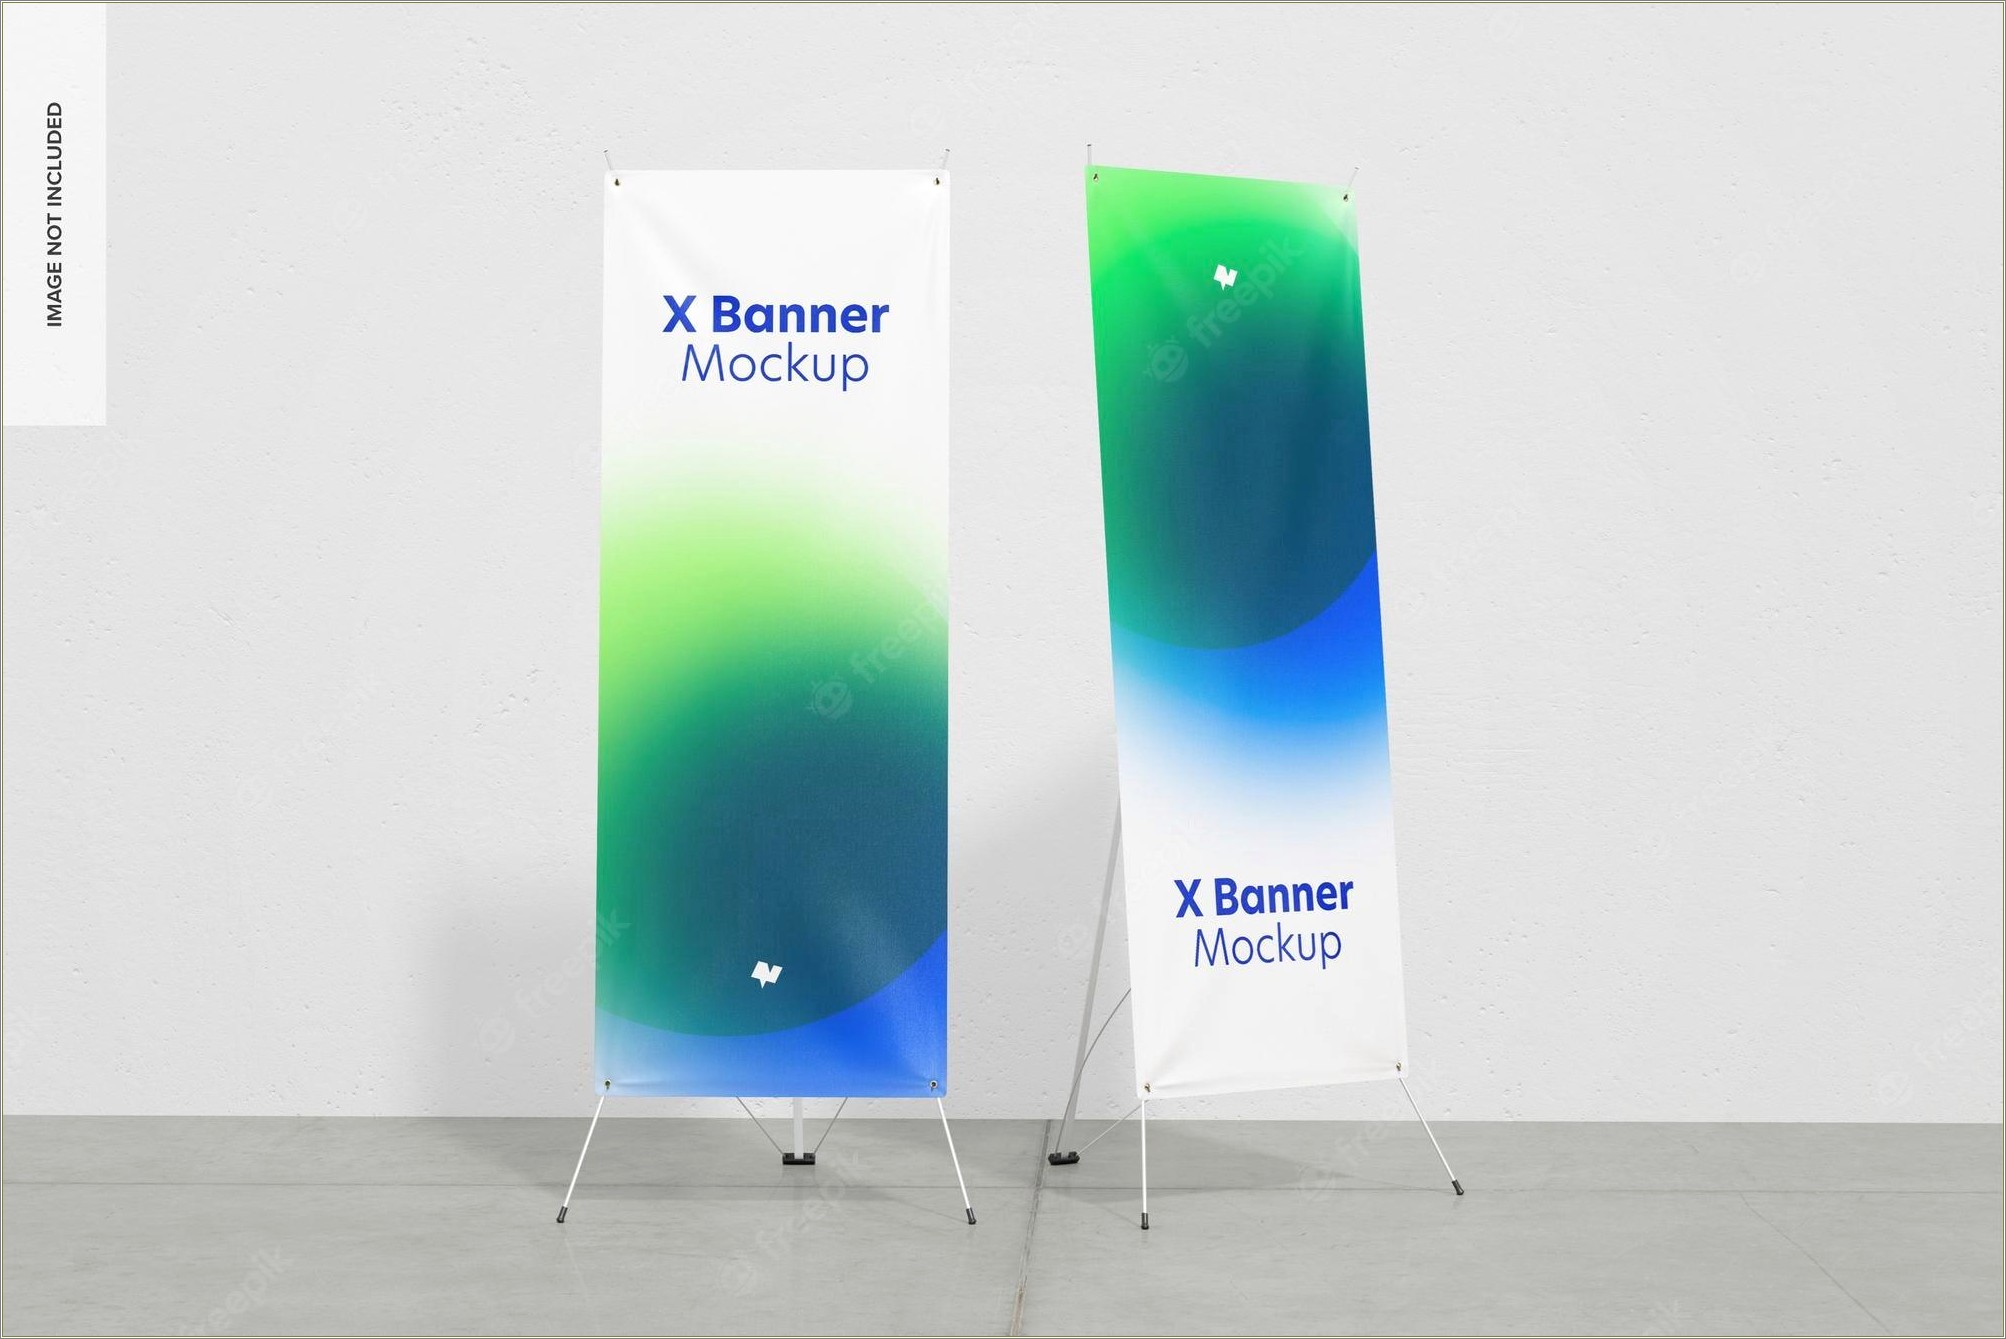 Free Background Art For Vertical Banner Template